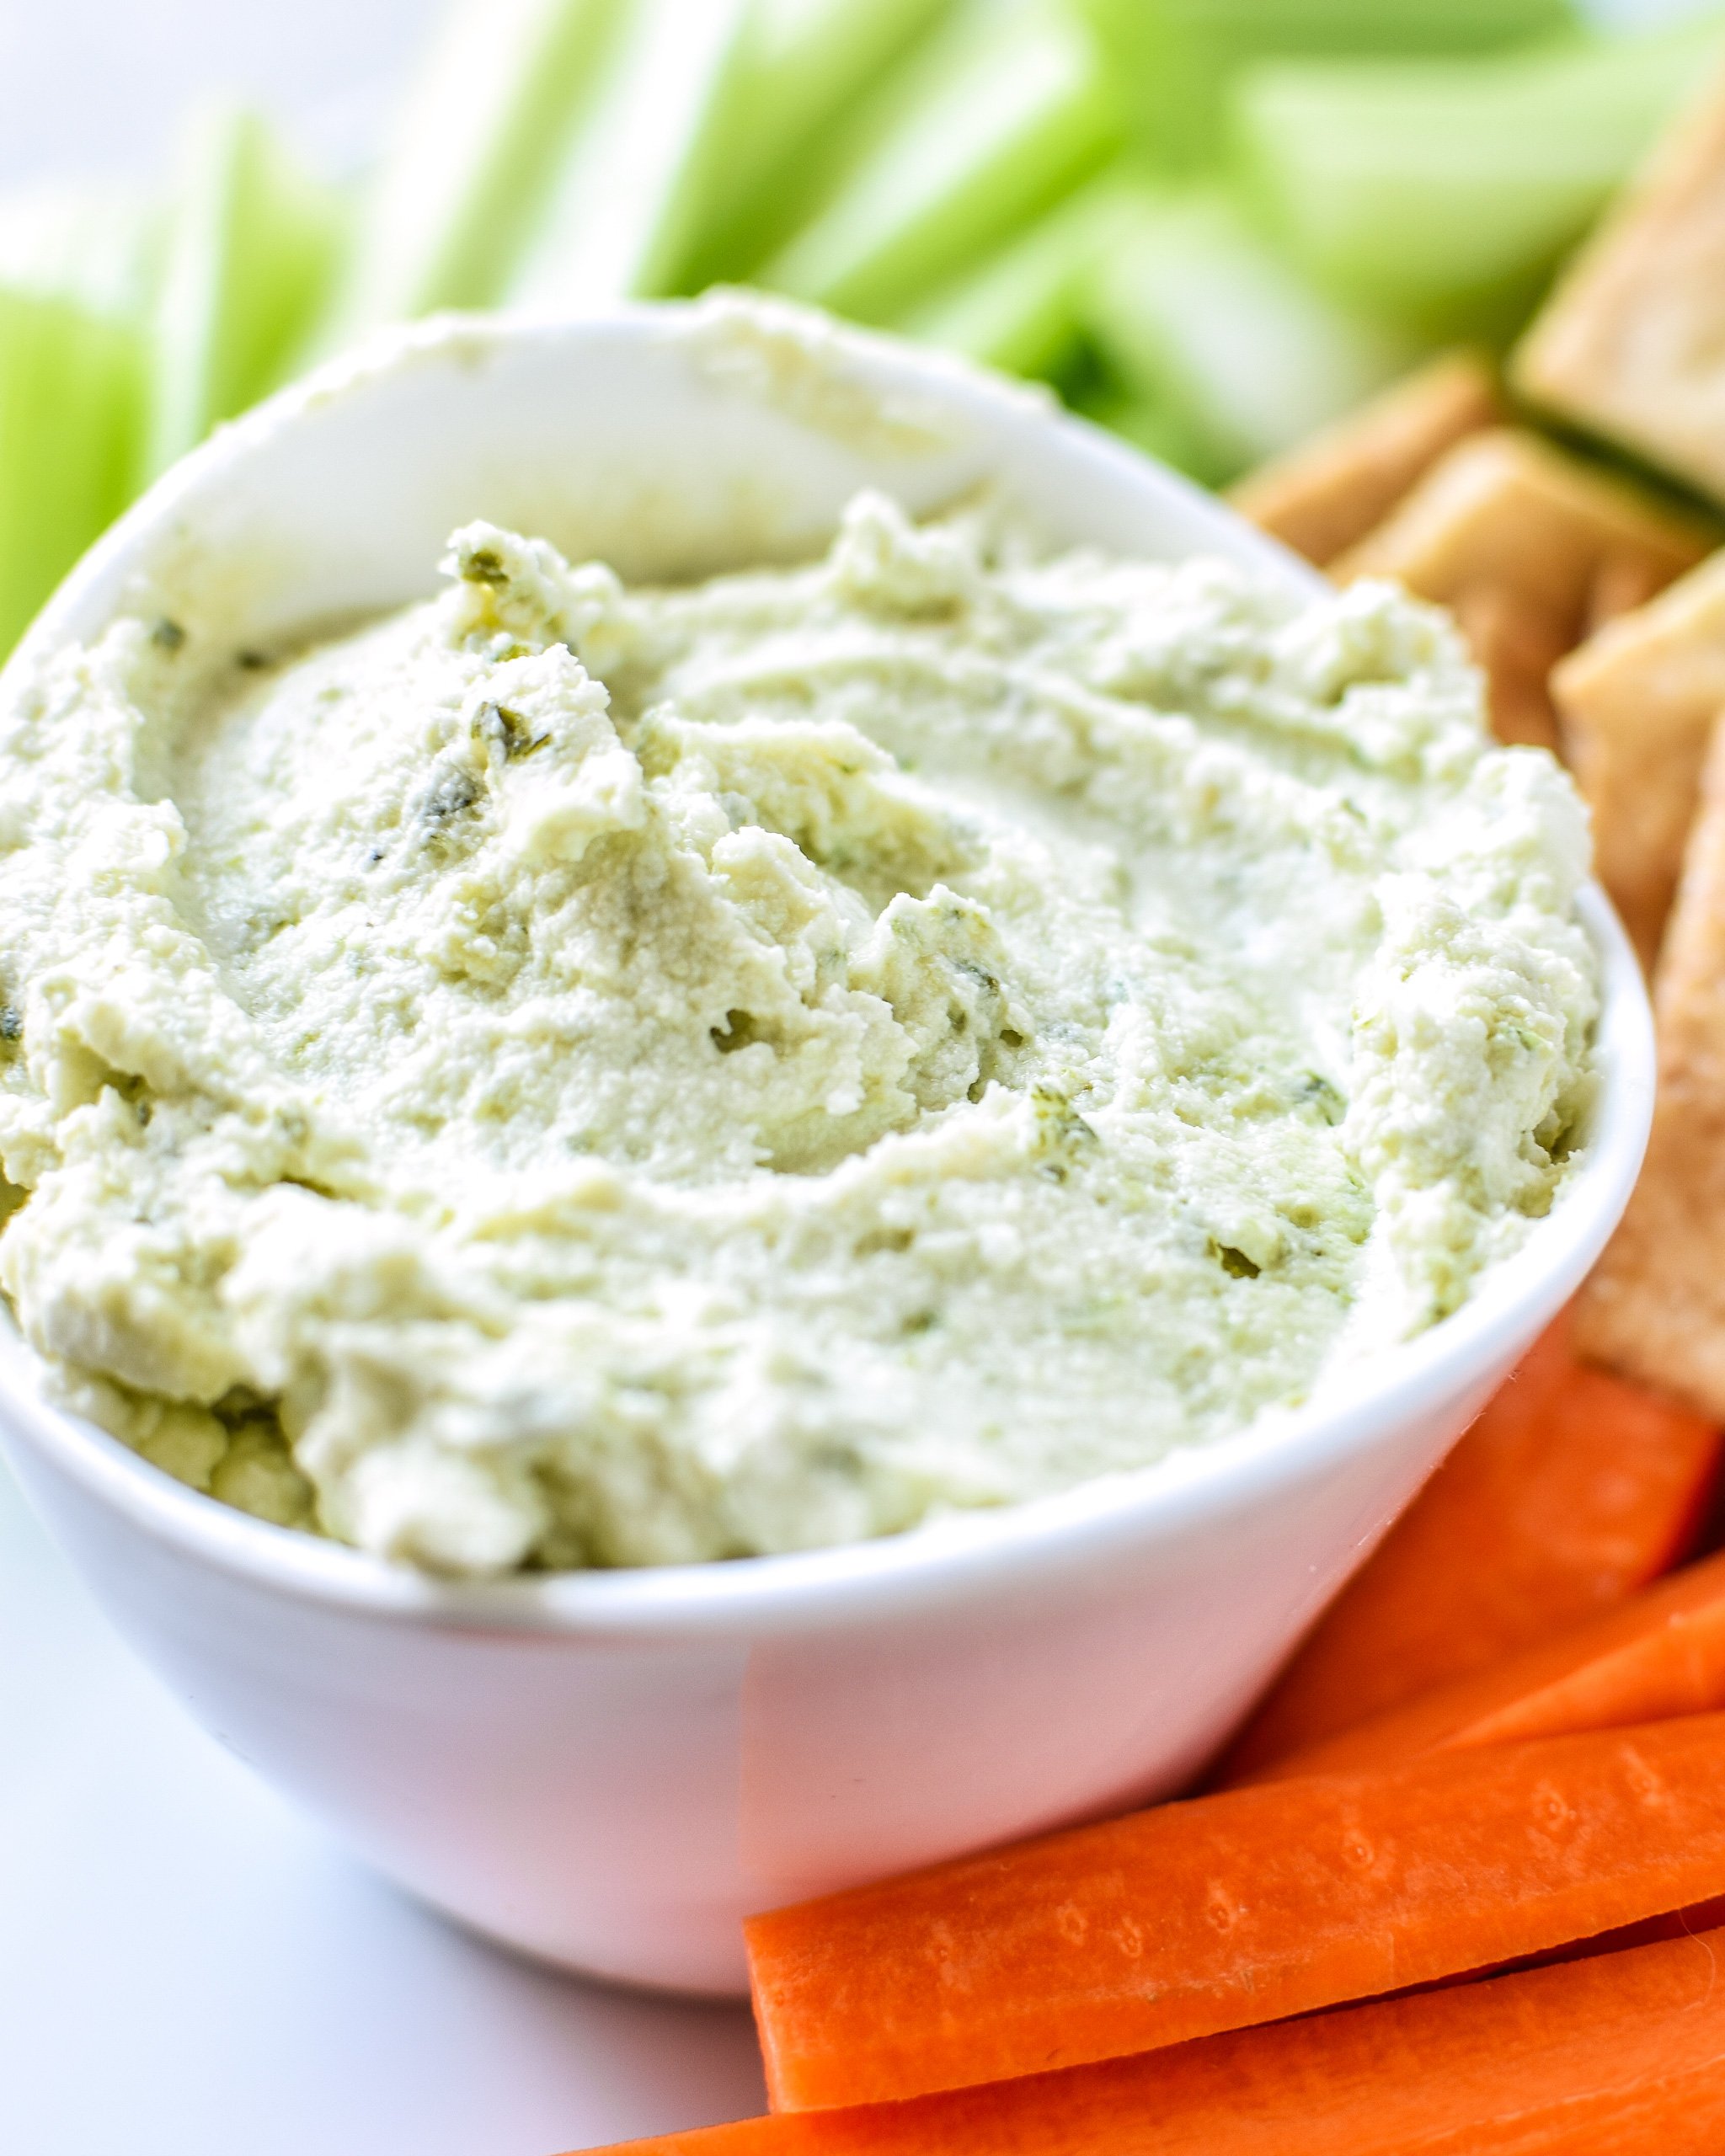 A cup of 3-Ingredient Pesto Goat Cheese Dip with carrots, celery and crackers.